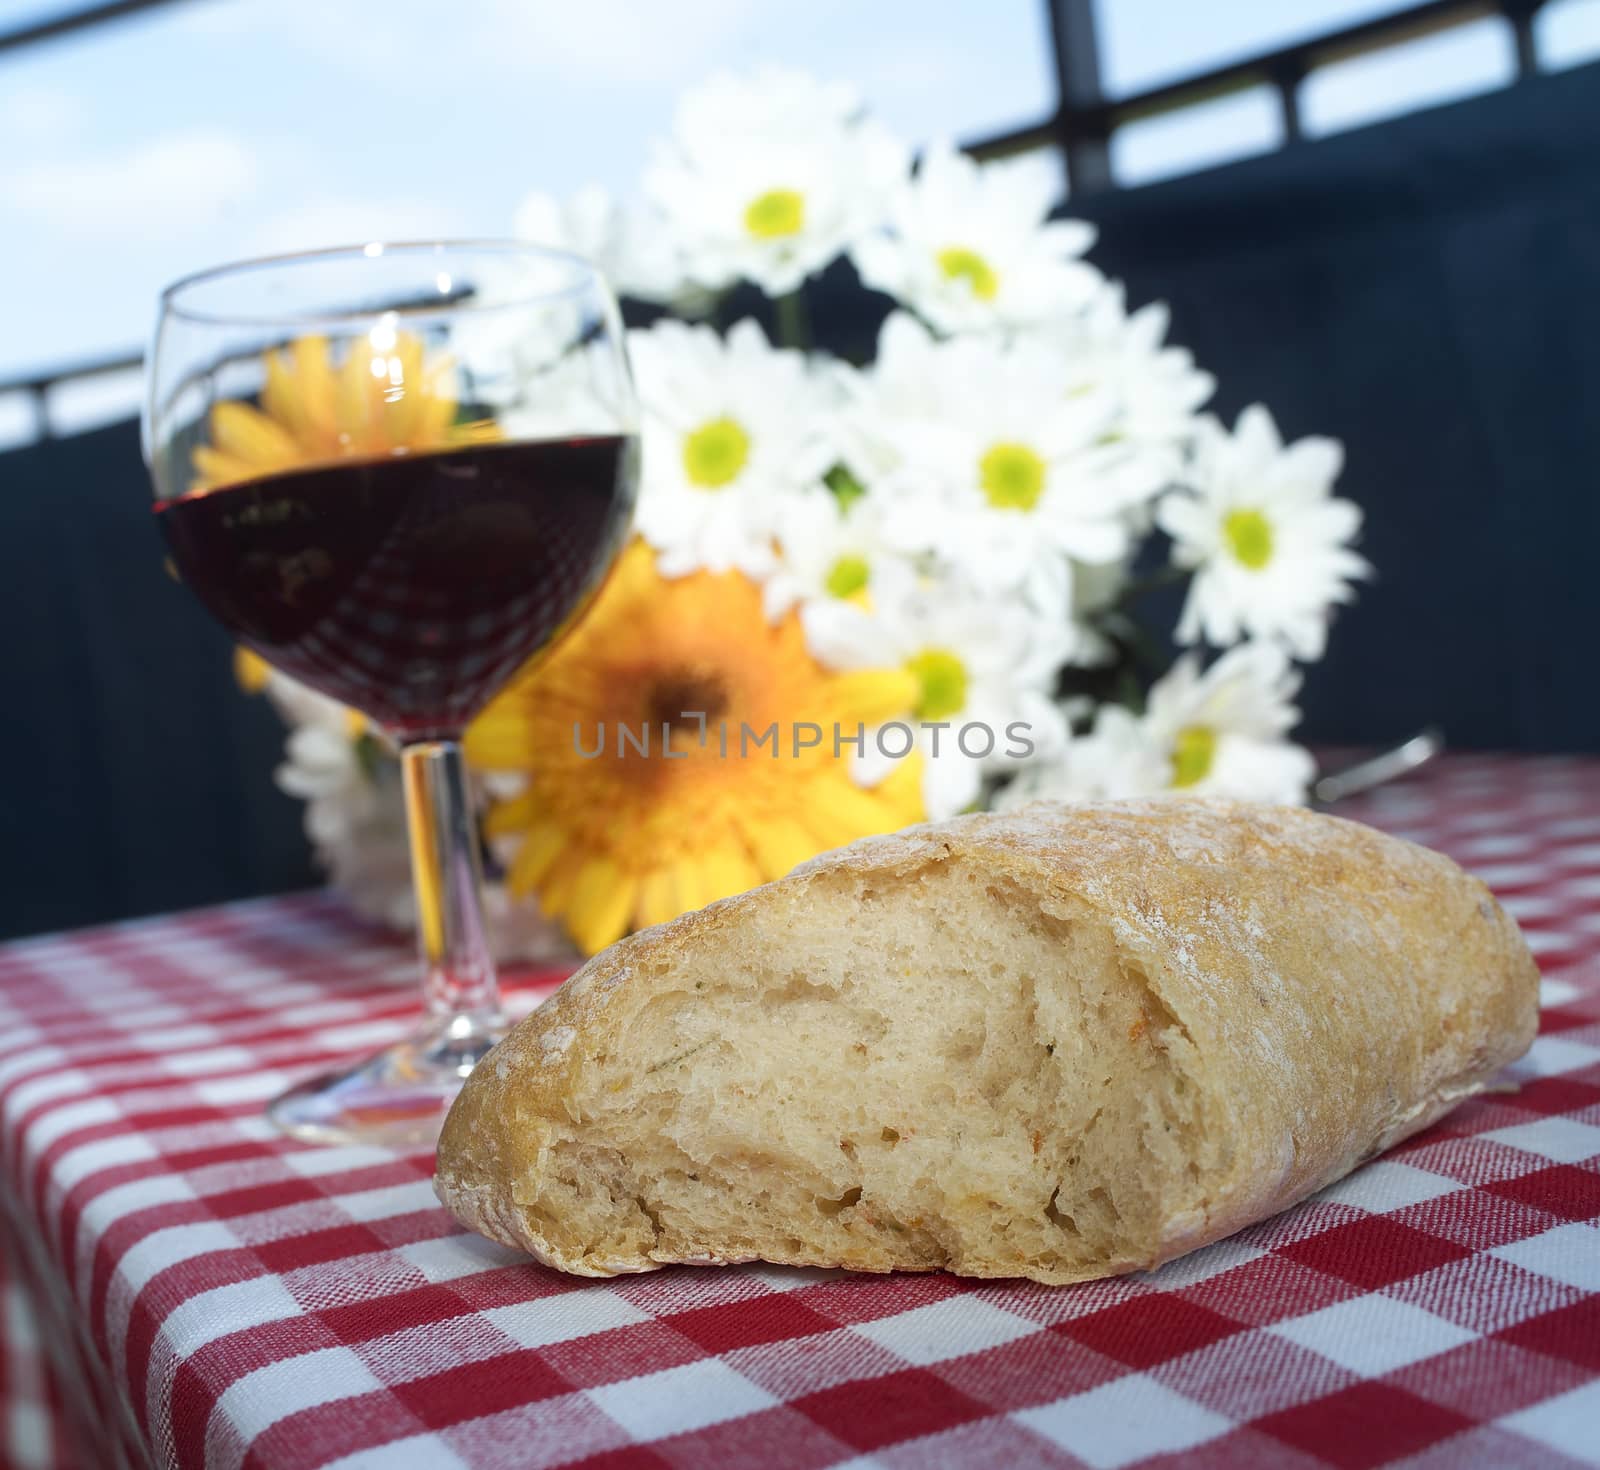 Wine and Bread on a table with some flowers